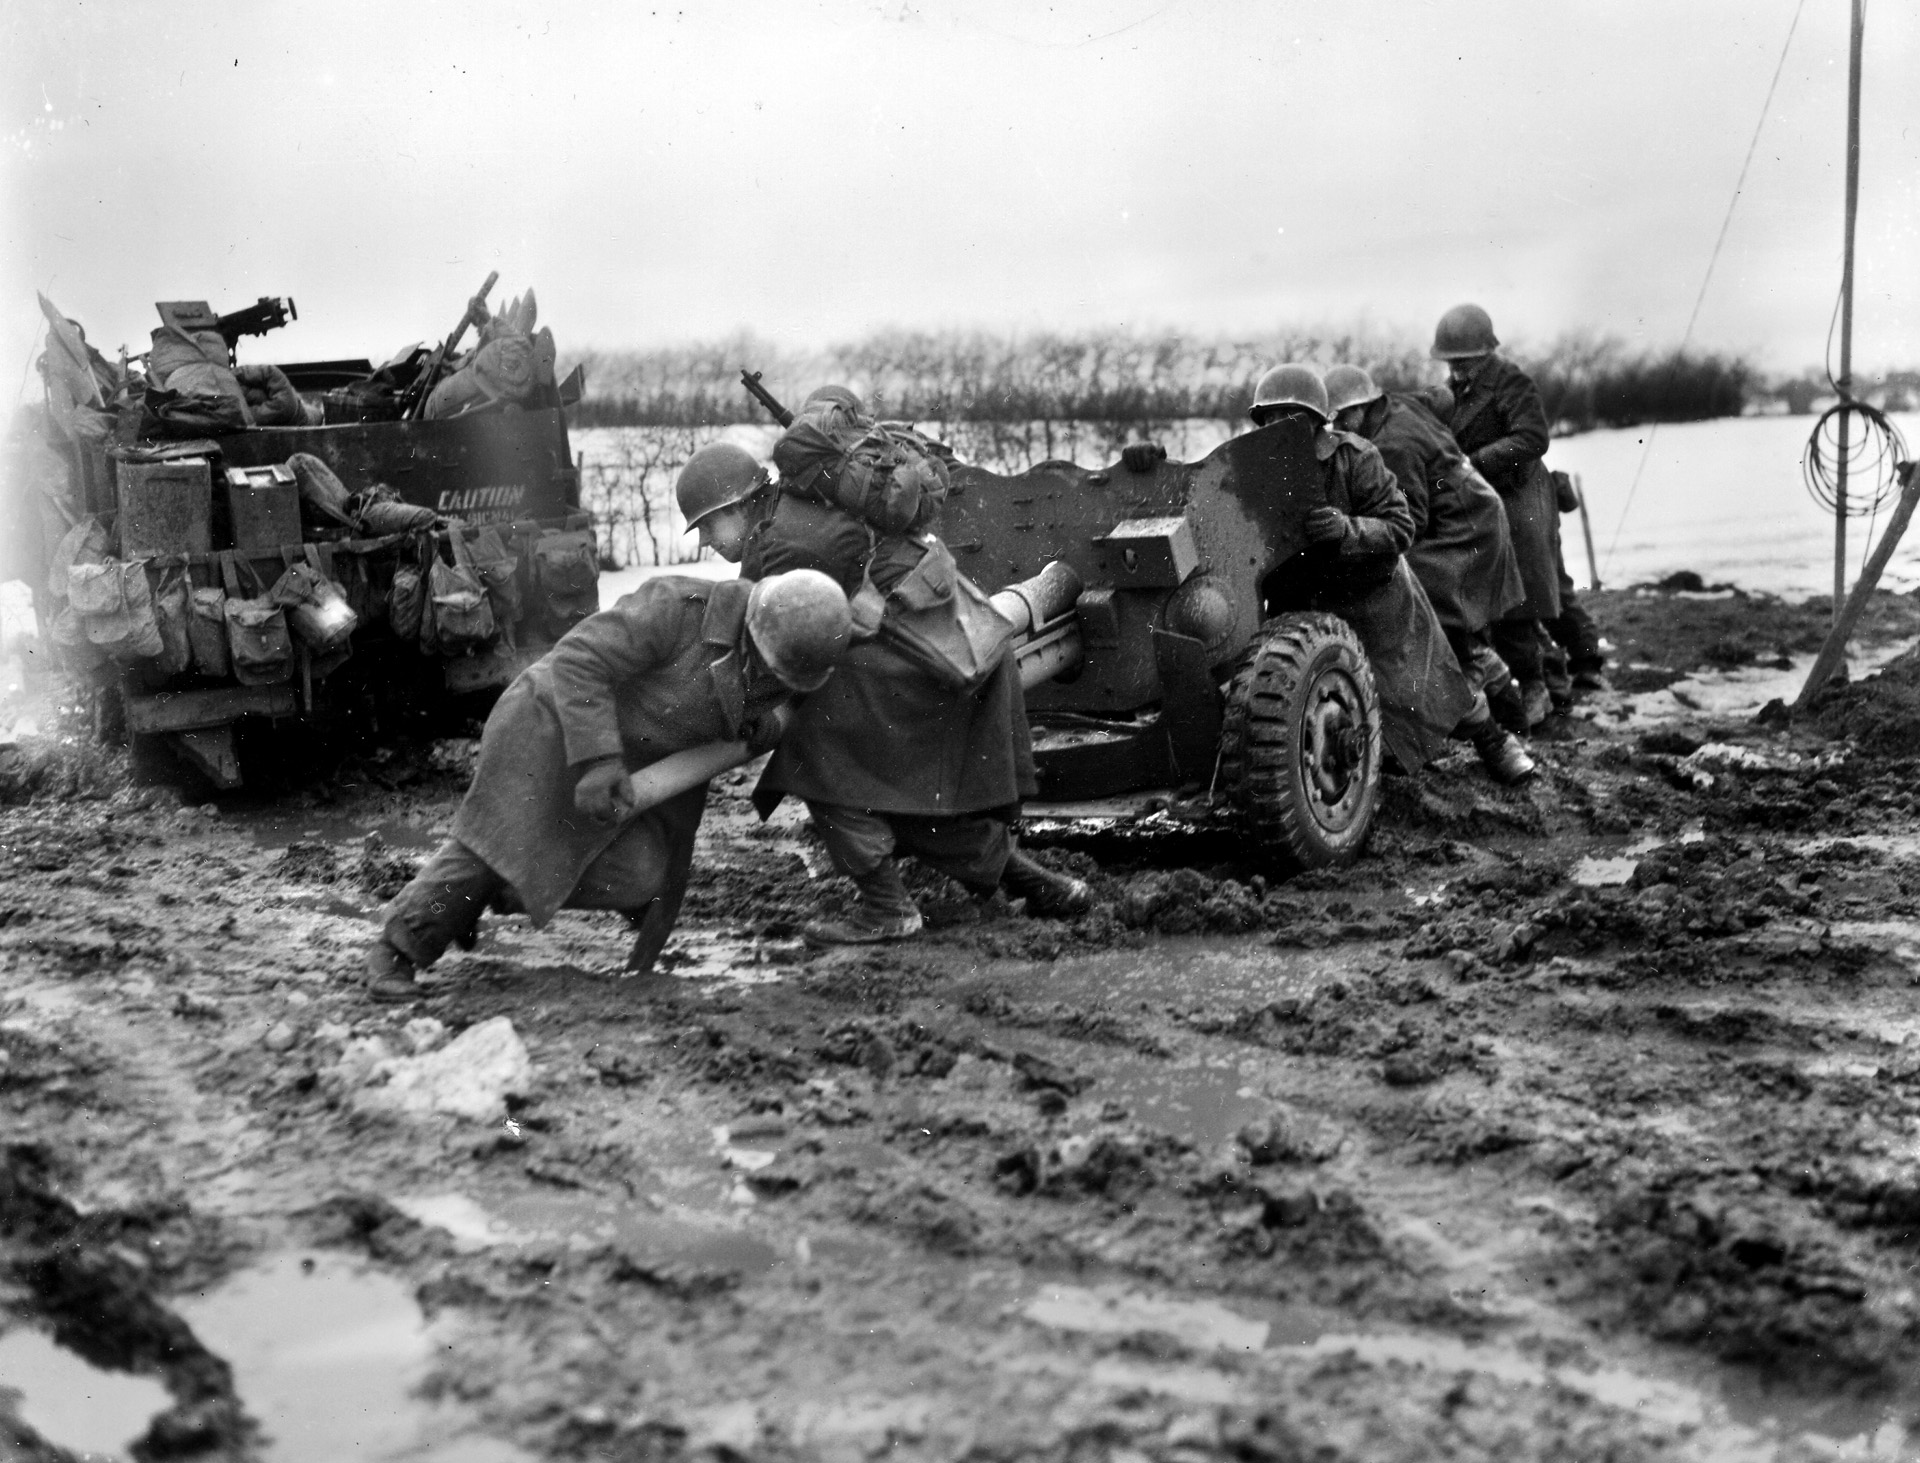 GIs manhandle a 57mm anti-tank guns into position during the Battle of the Bulge.